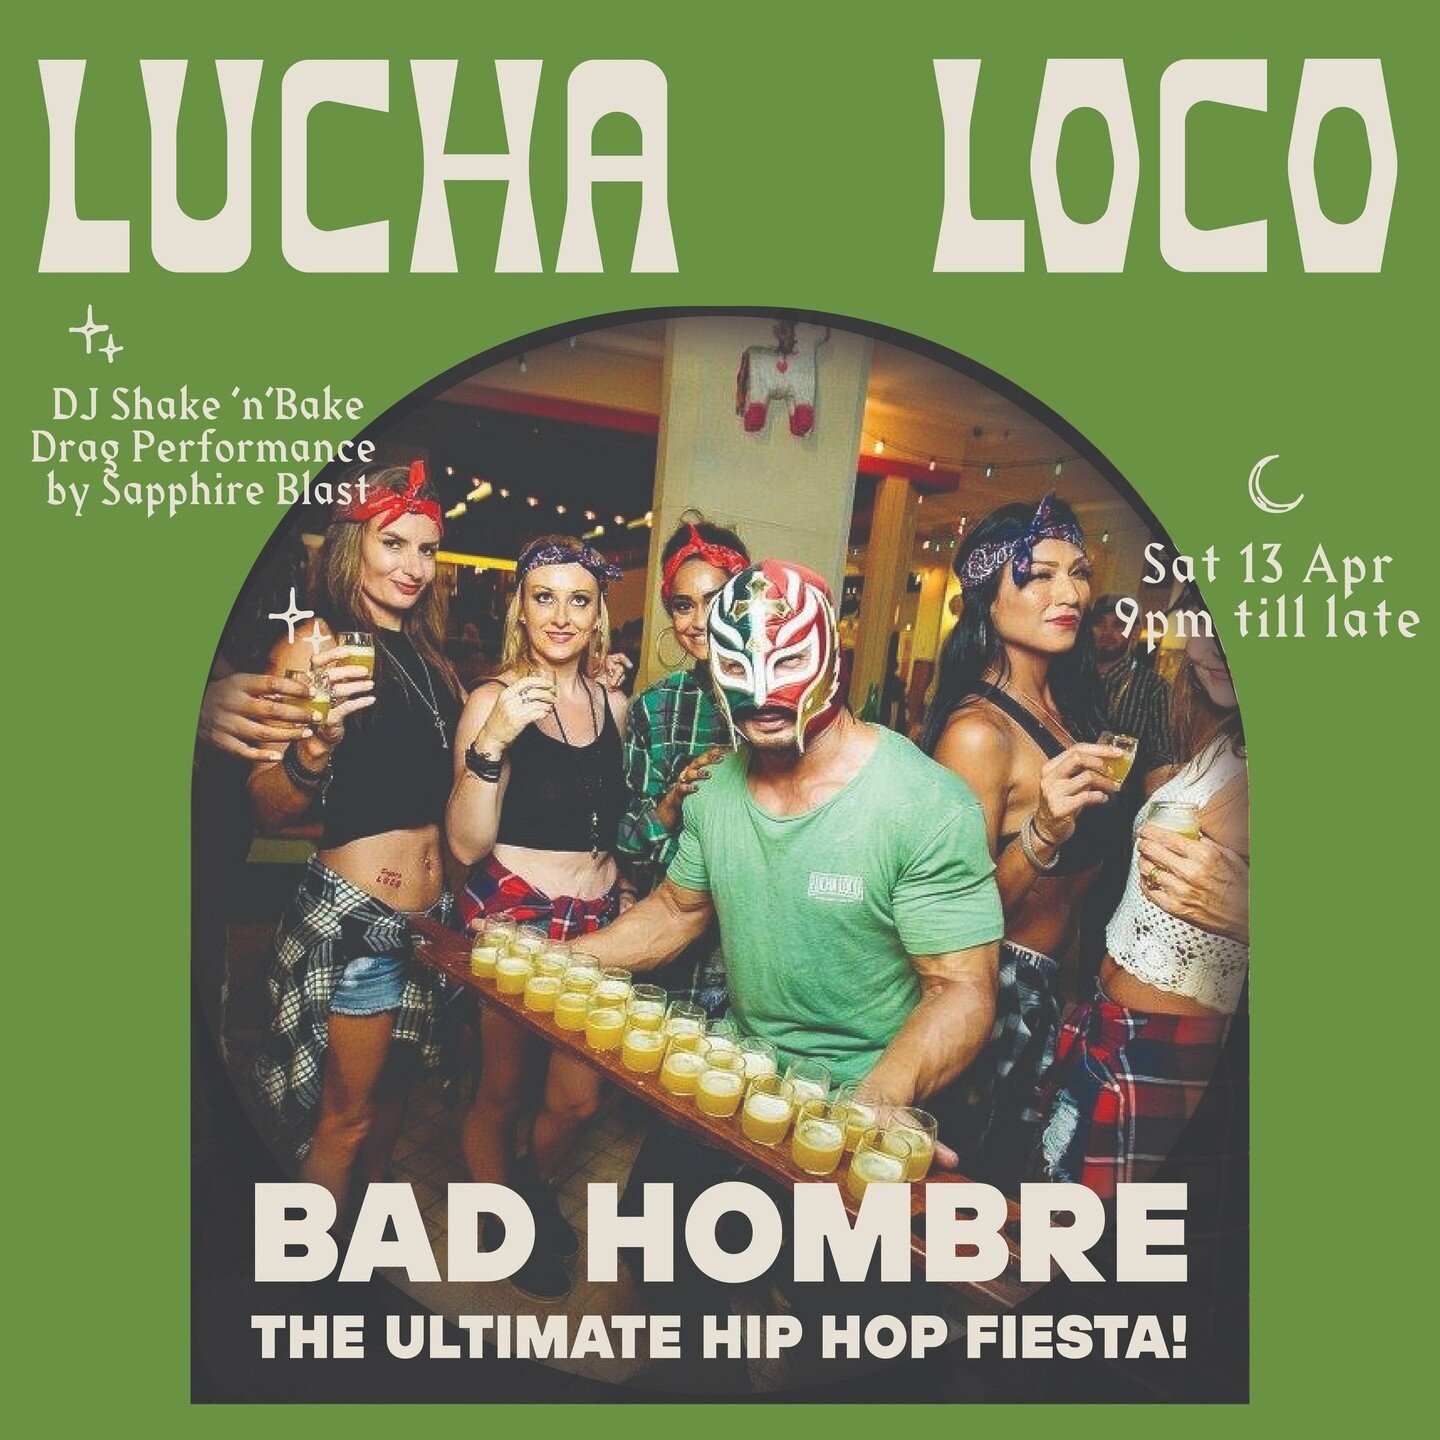 Bad Hombres are back! It's the ultimate 90s HIP HOP FIESTA. We're dialing it back to the golden era, with SHAKE N BAKE spinning those phat beats that'll have you moving all night long. ⁠
⁠
Hold onto your snapbacks, because Drag Queen Sapphire Blast i